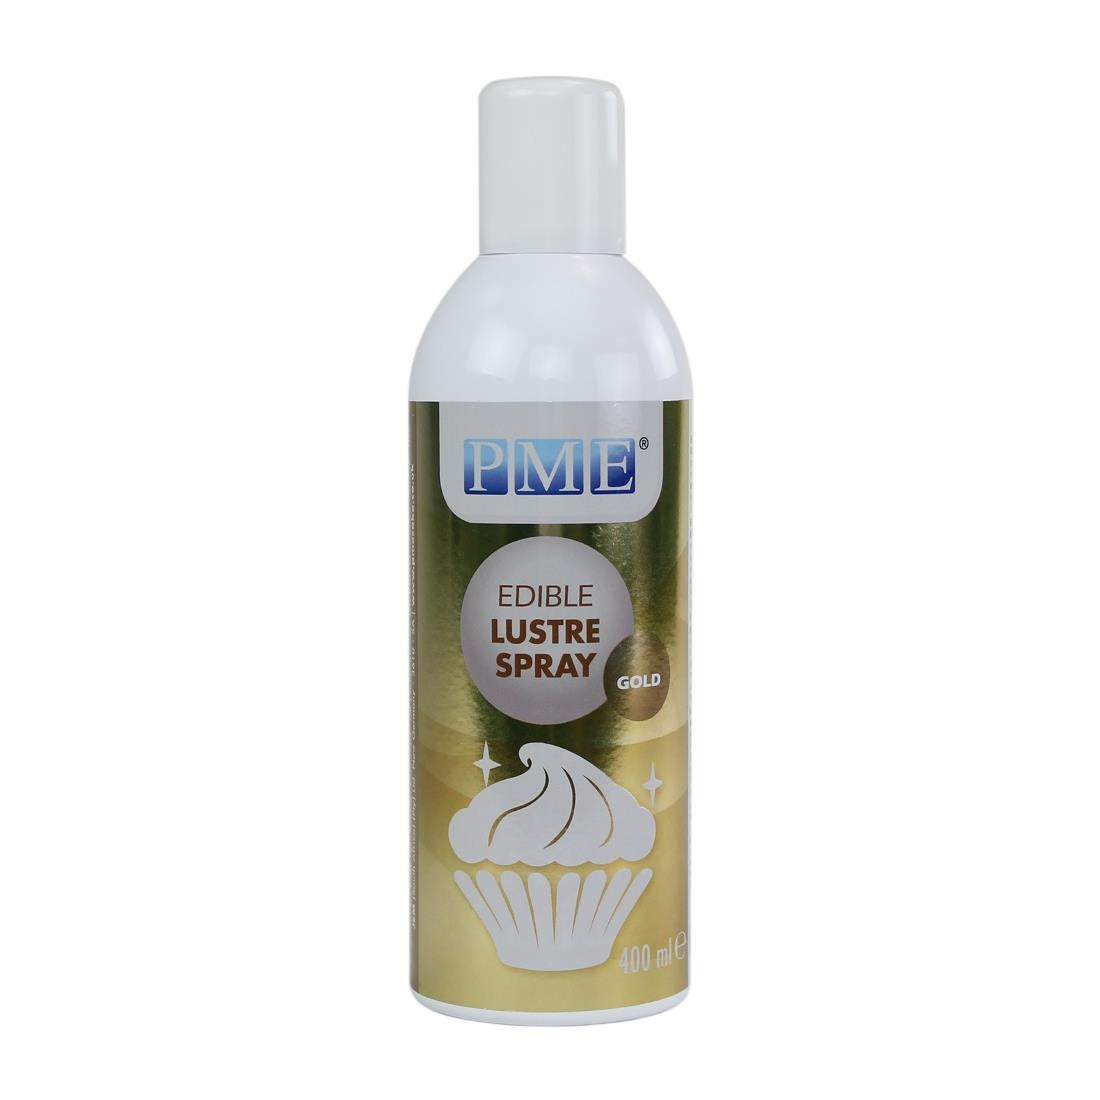 CX145 PME Edible Lustre Spray Gold 400ml JD Catering Equipment Solutions Ltd